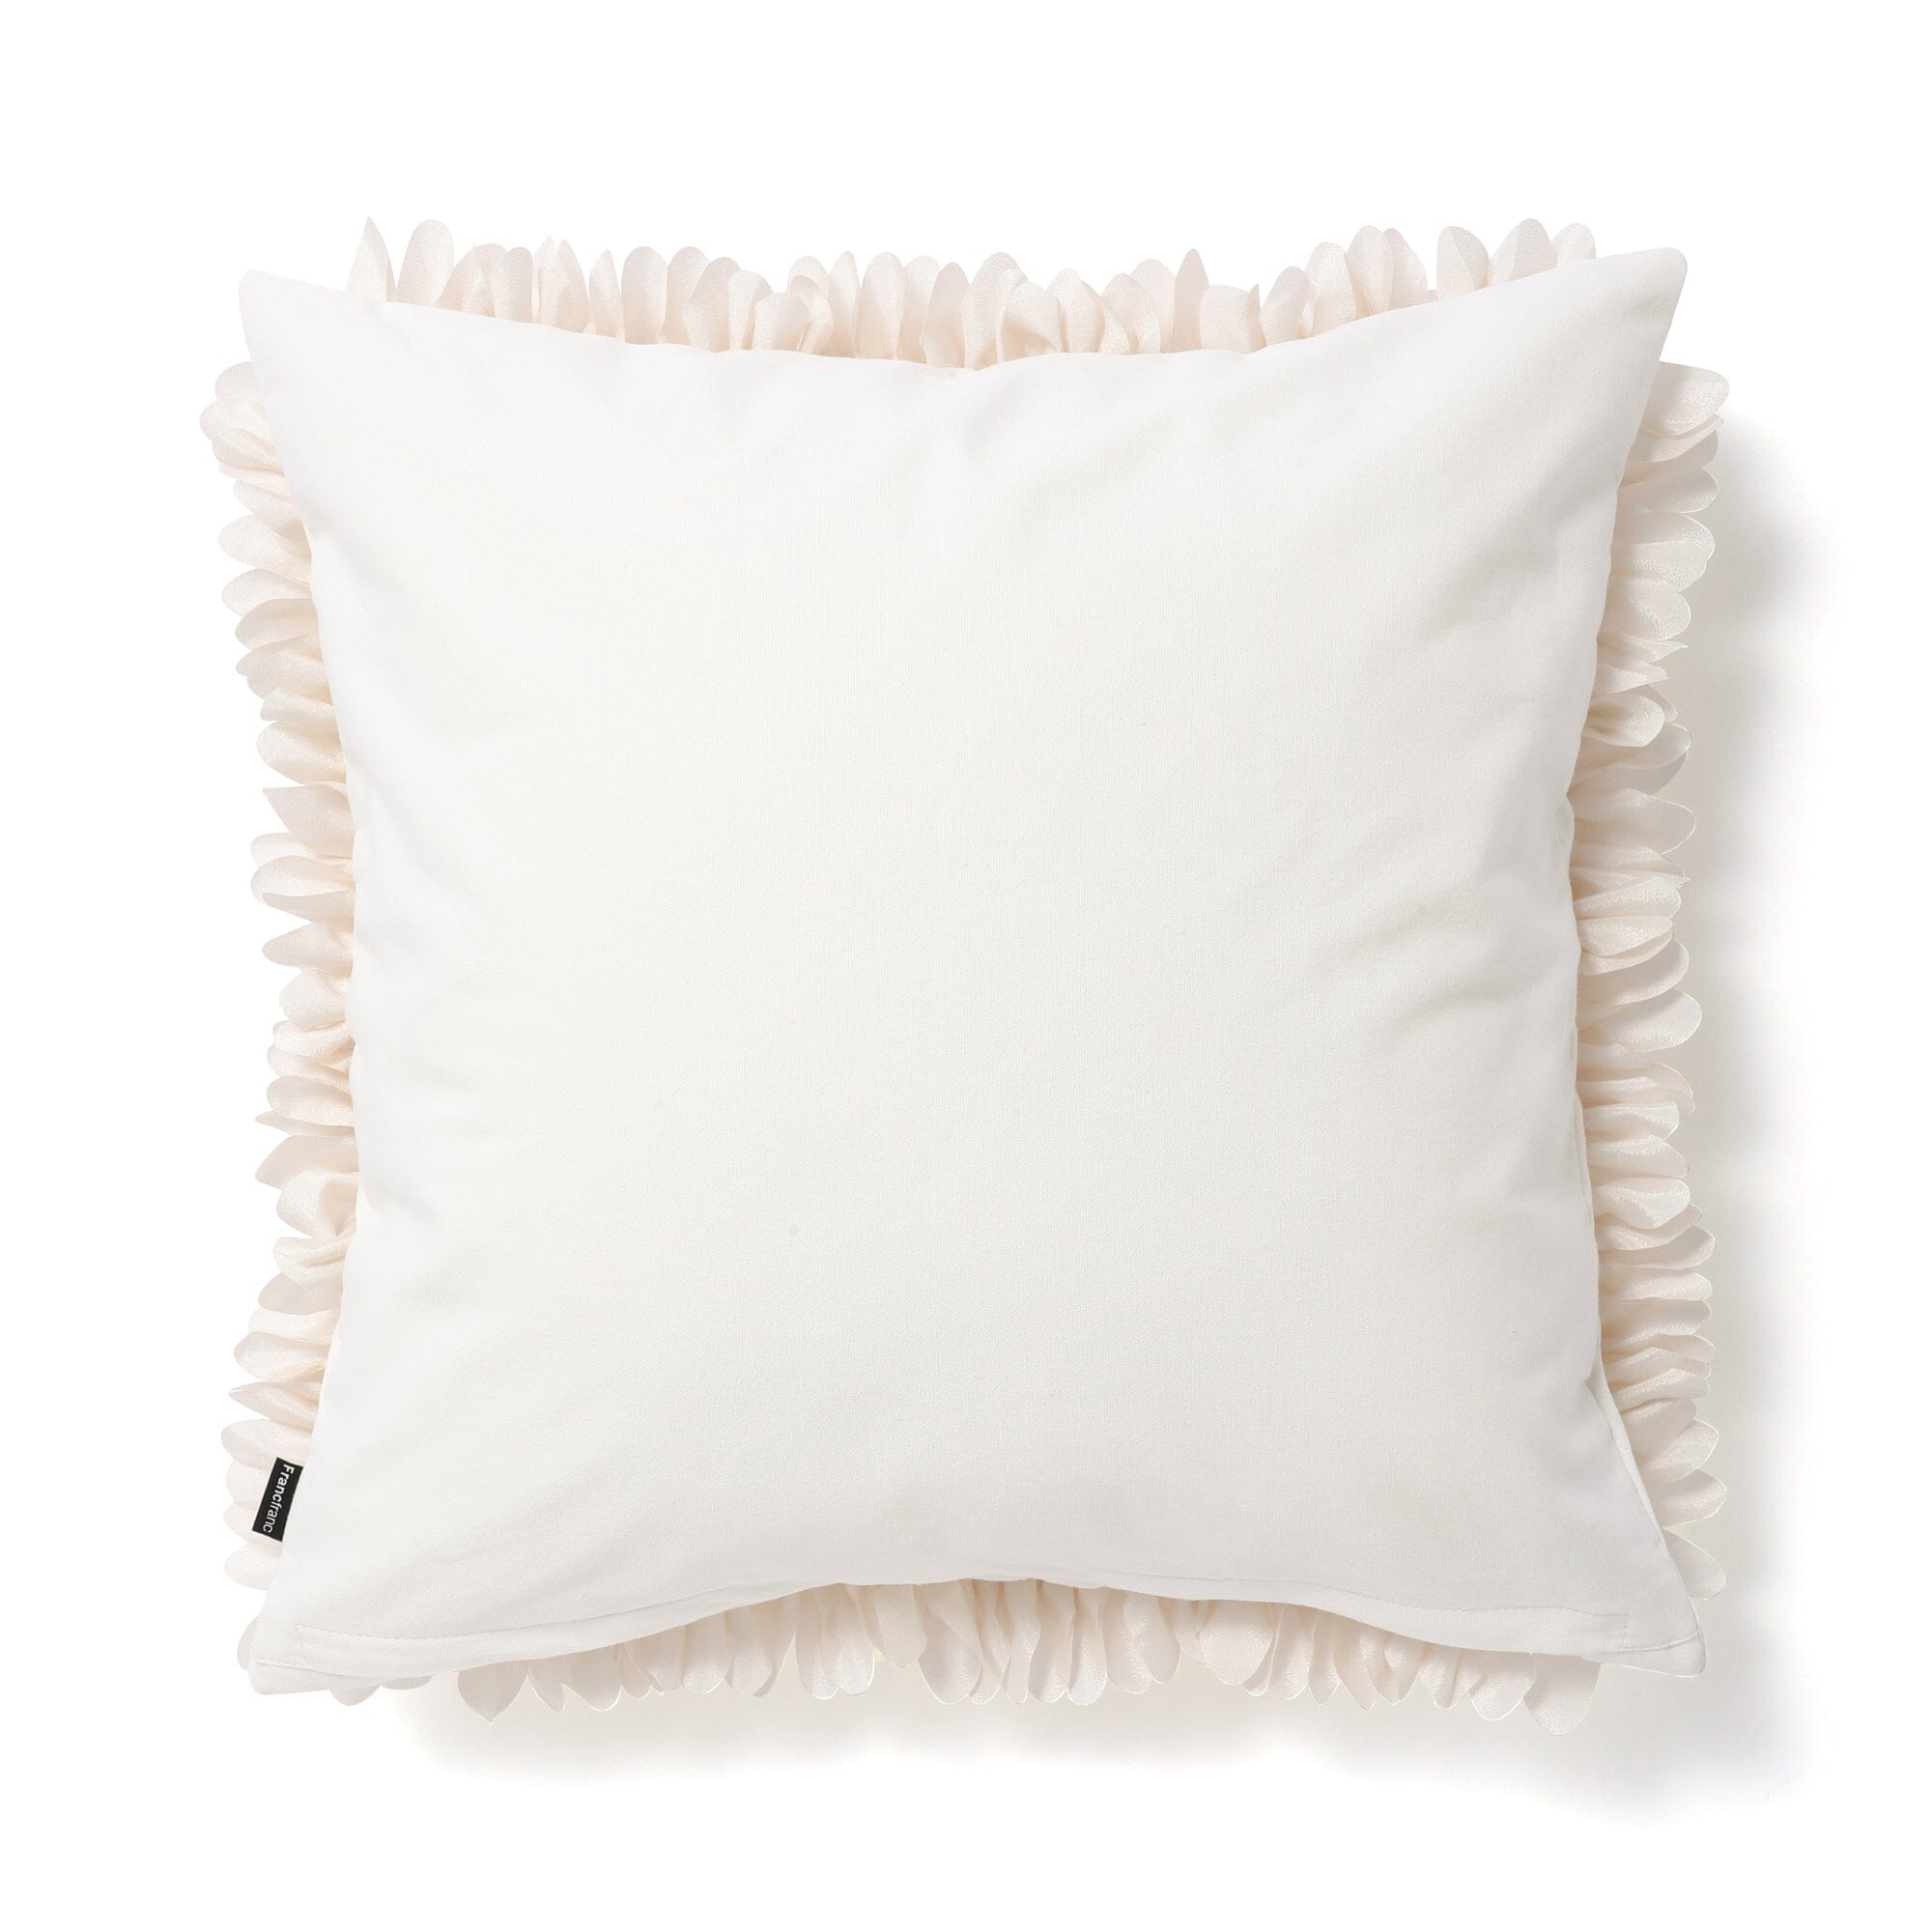 Flower Applique Cushion Cover 450 X 450 Ivory